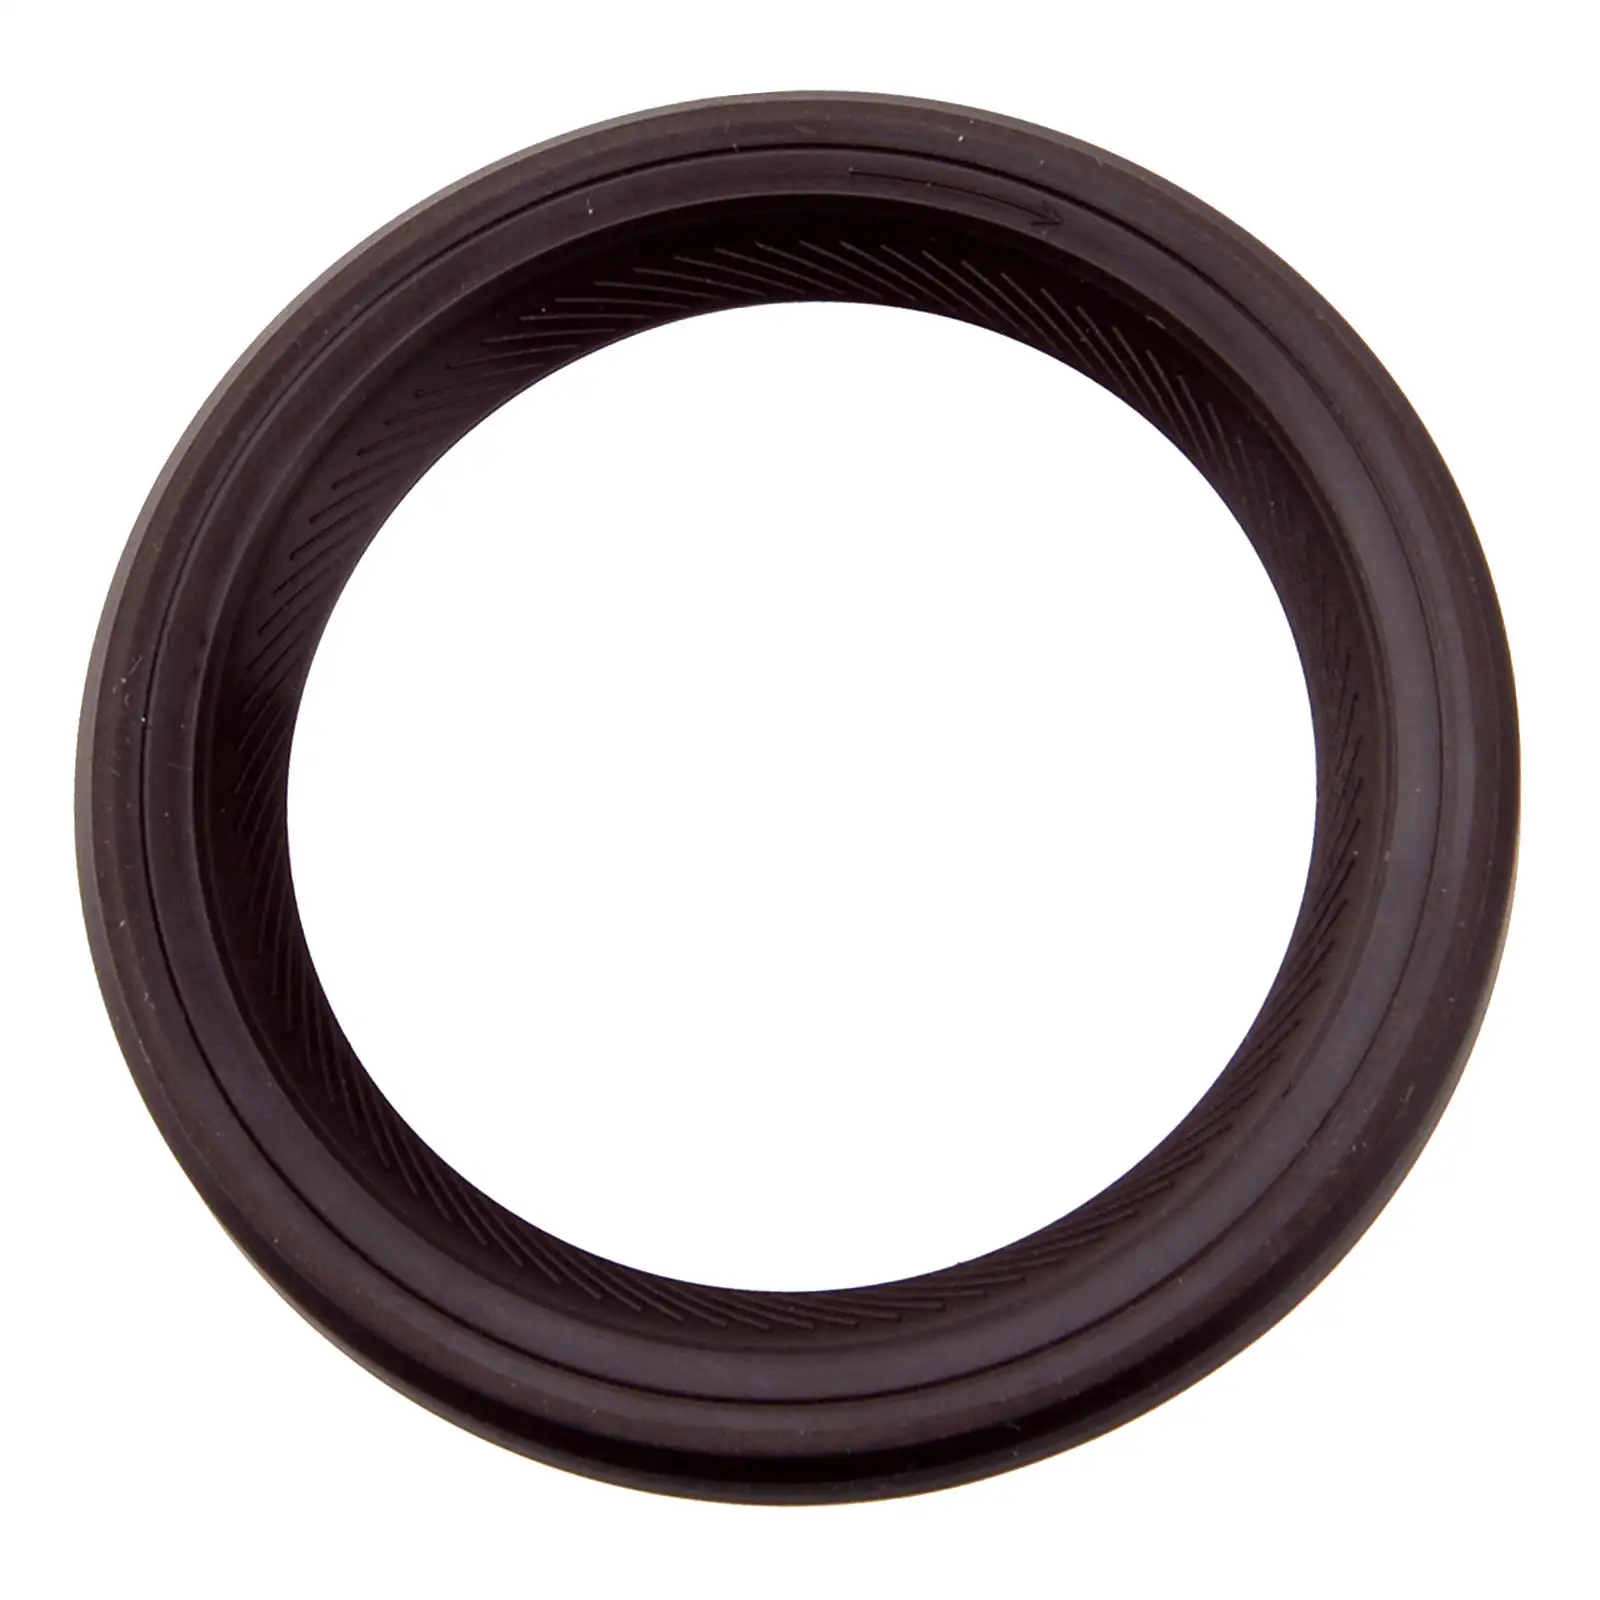 

Transmission Oil Seal Rubber Oil Seal 01V Fit for ZF5HP19 01V Auto Parts Direct Replace